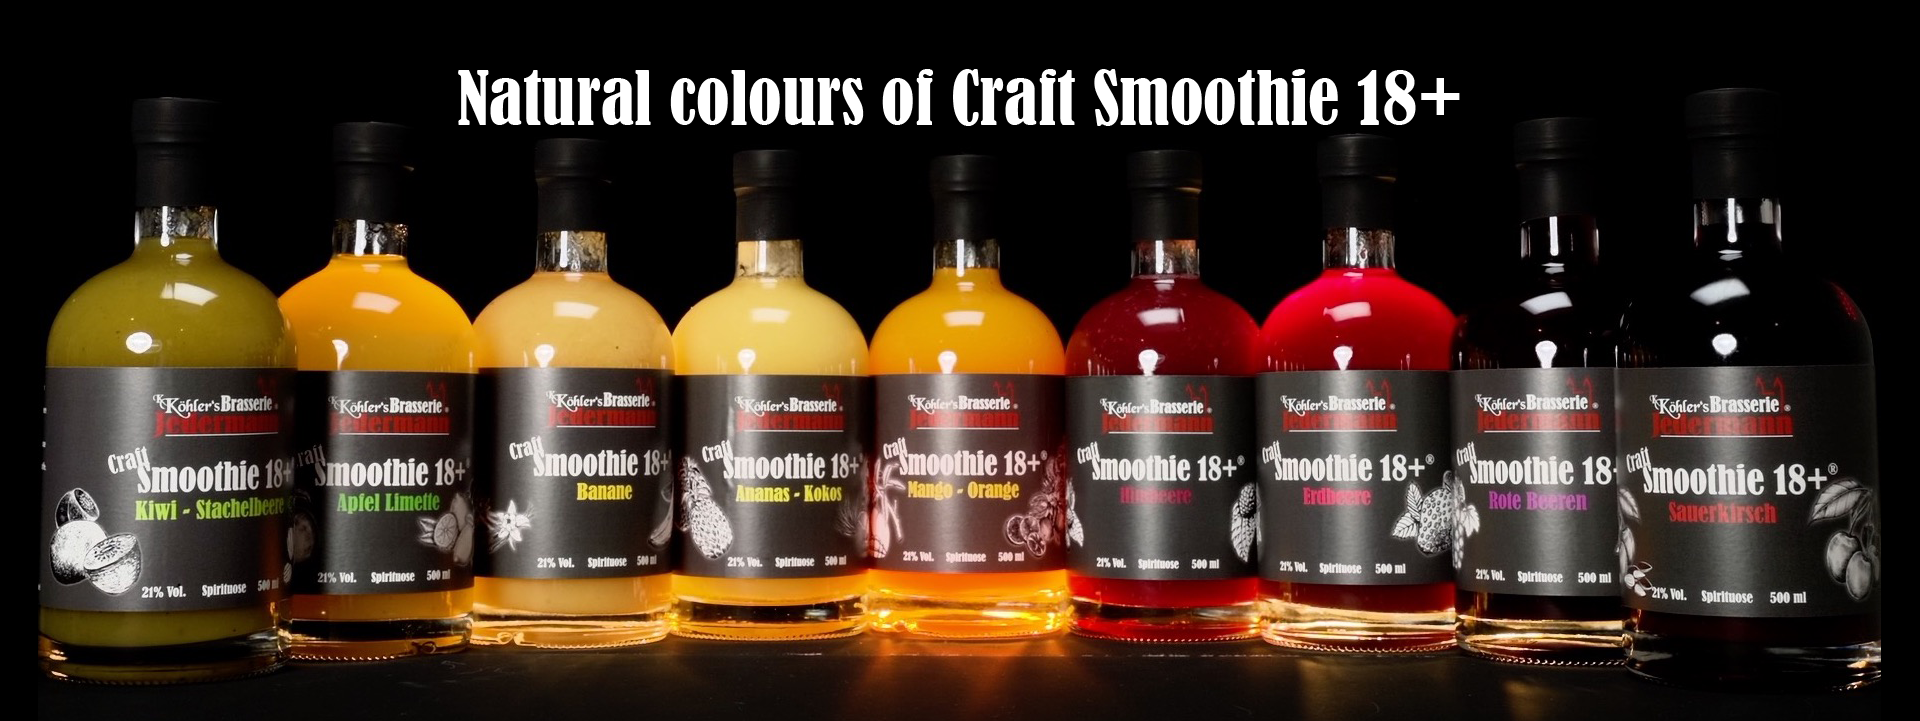 Natural colours of Craft Smoothie 18+